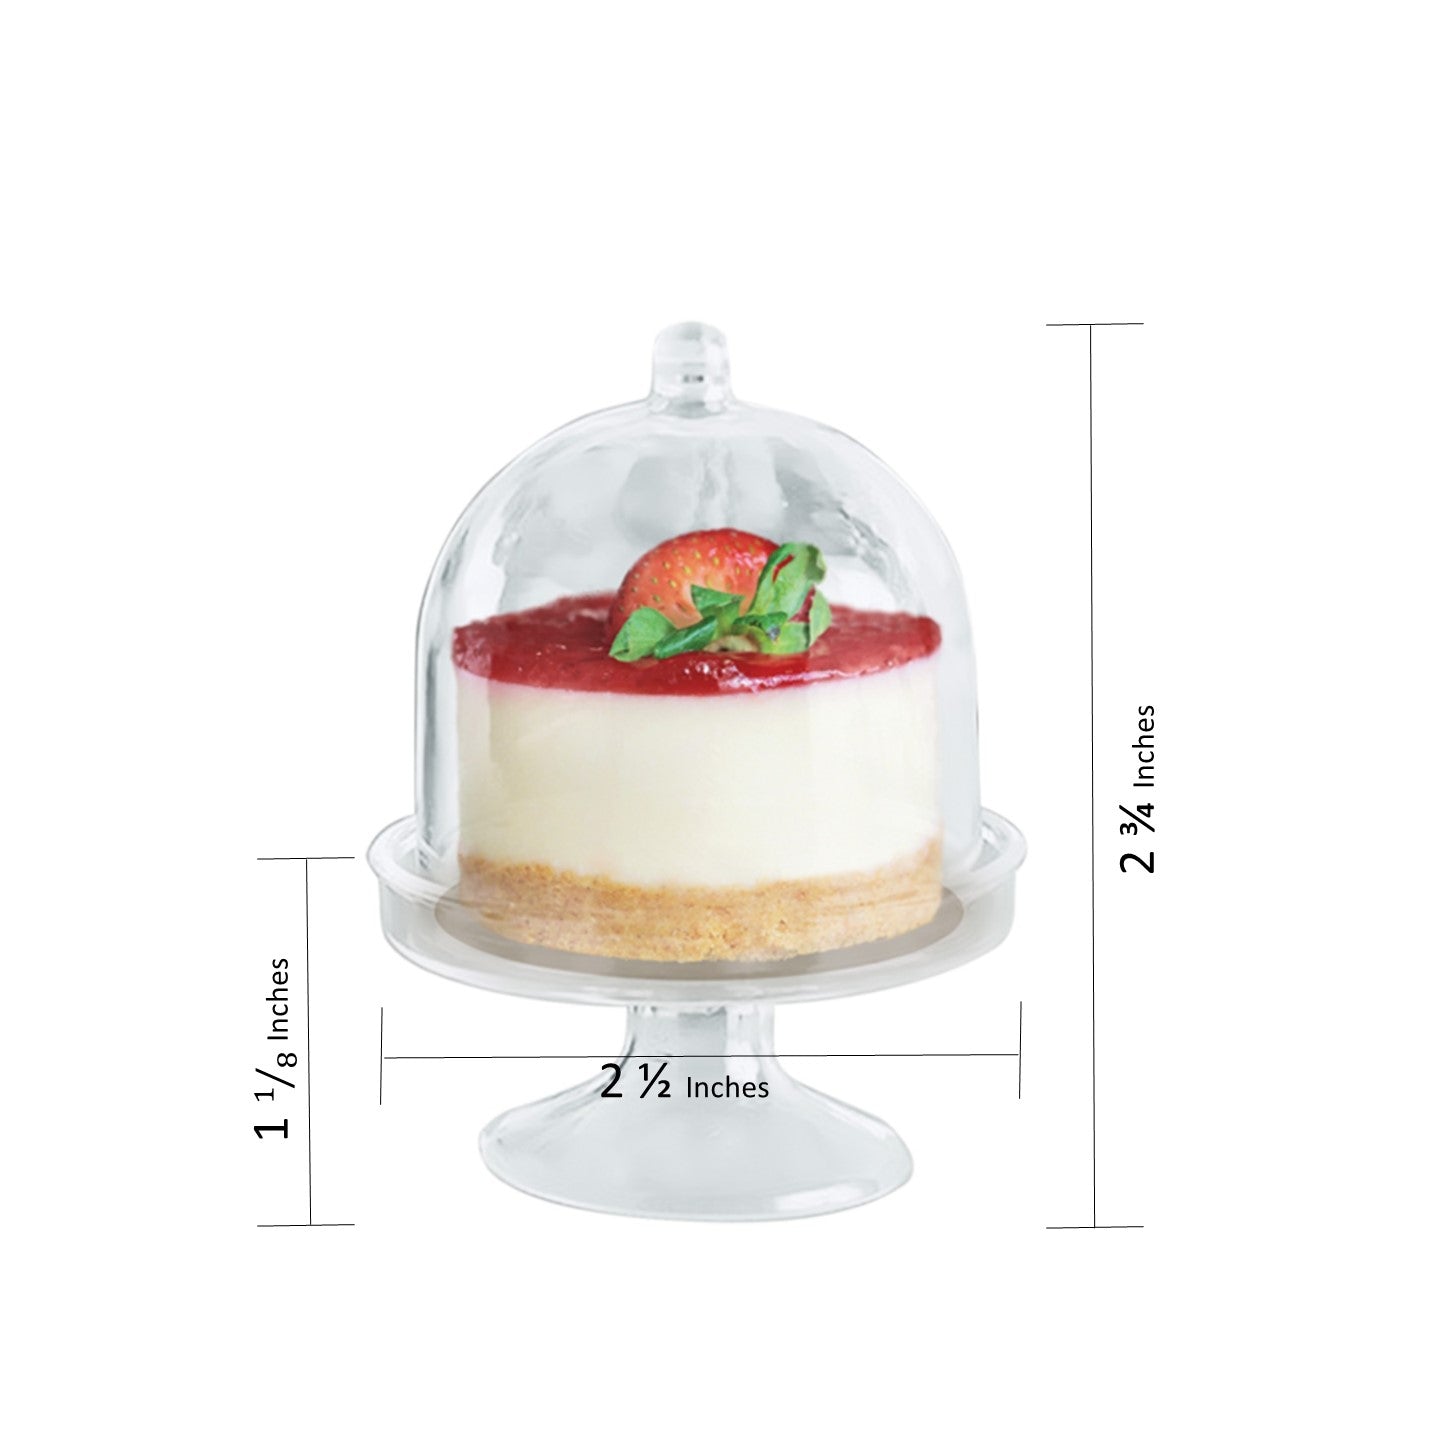 Amazon.com: Royalty Art 4-in-1 Cake Stand with Dome, Cheese Board, Covered  Platter, and Serving Tray for Pastries, Pies, Appetizers, and Holiday  Treats, Decorative Kitchen Server and Display : Home & Kitchen